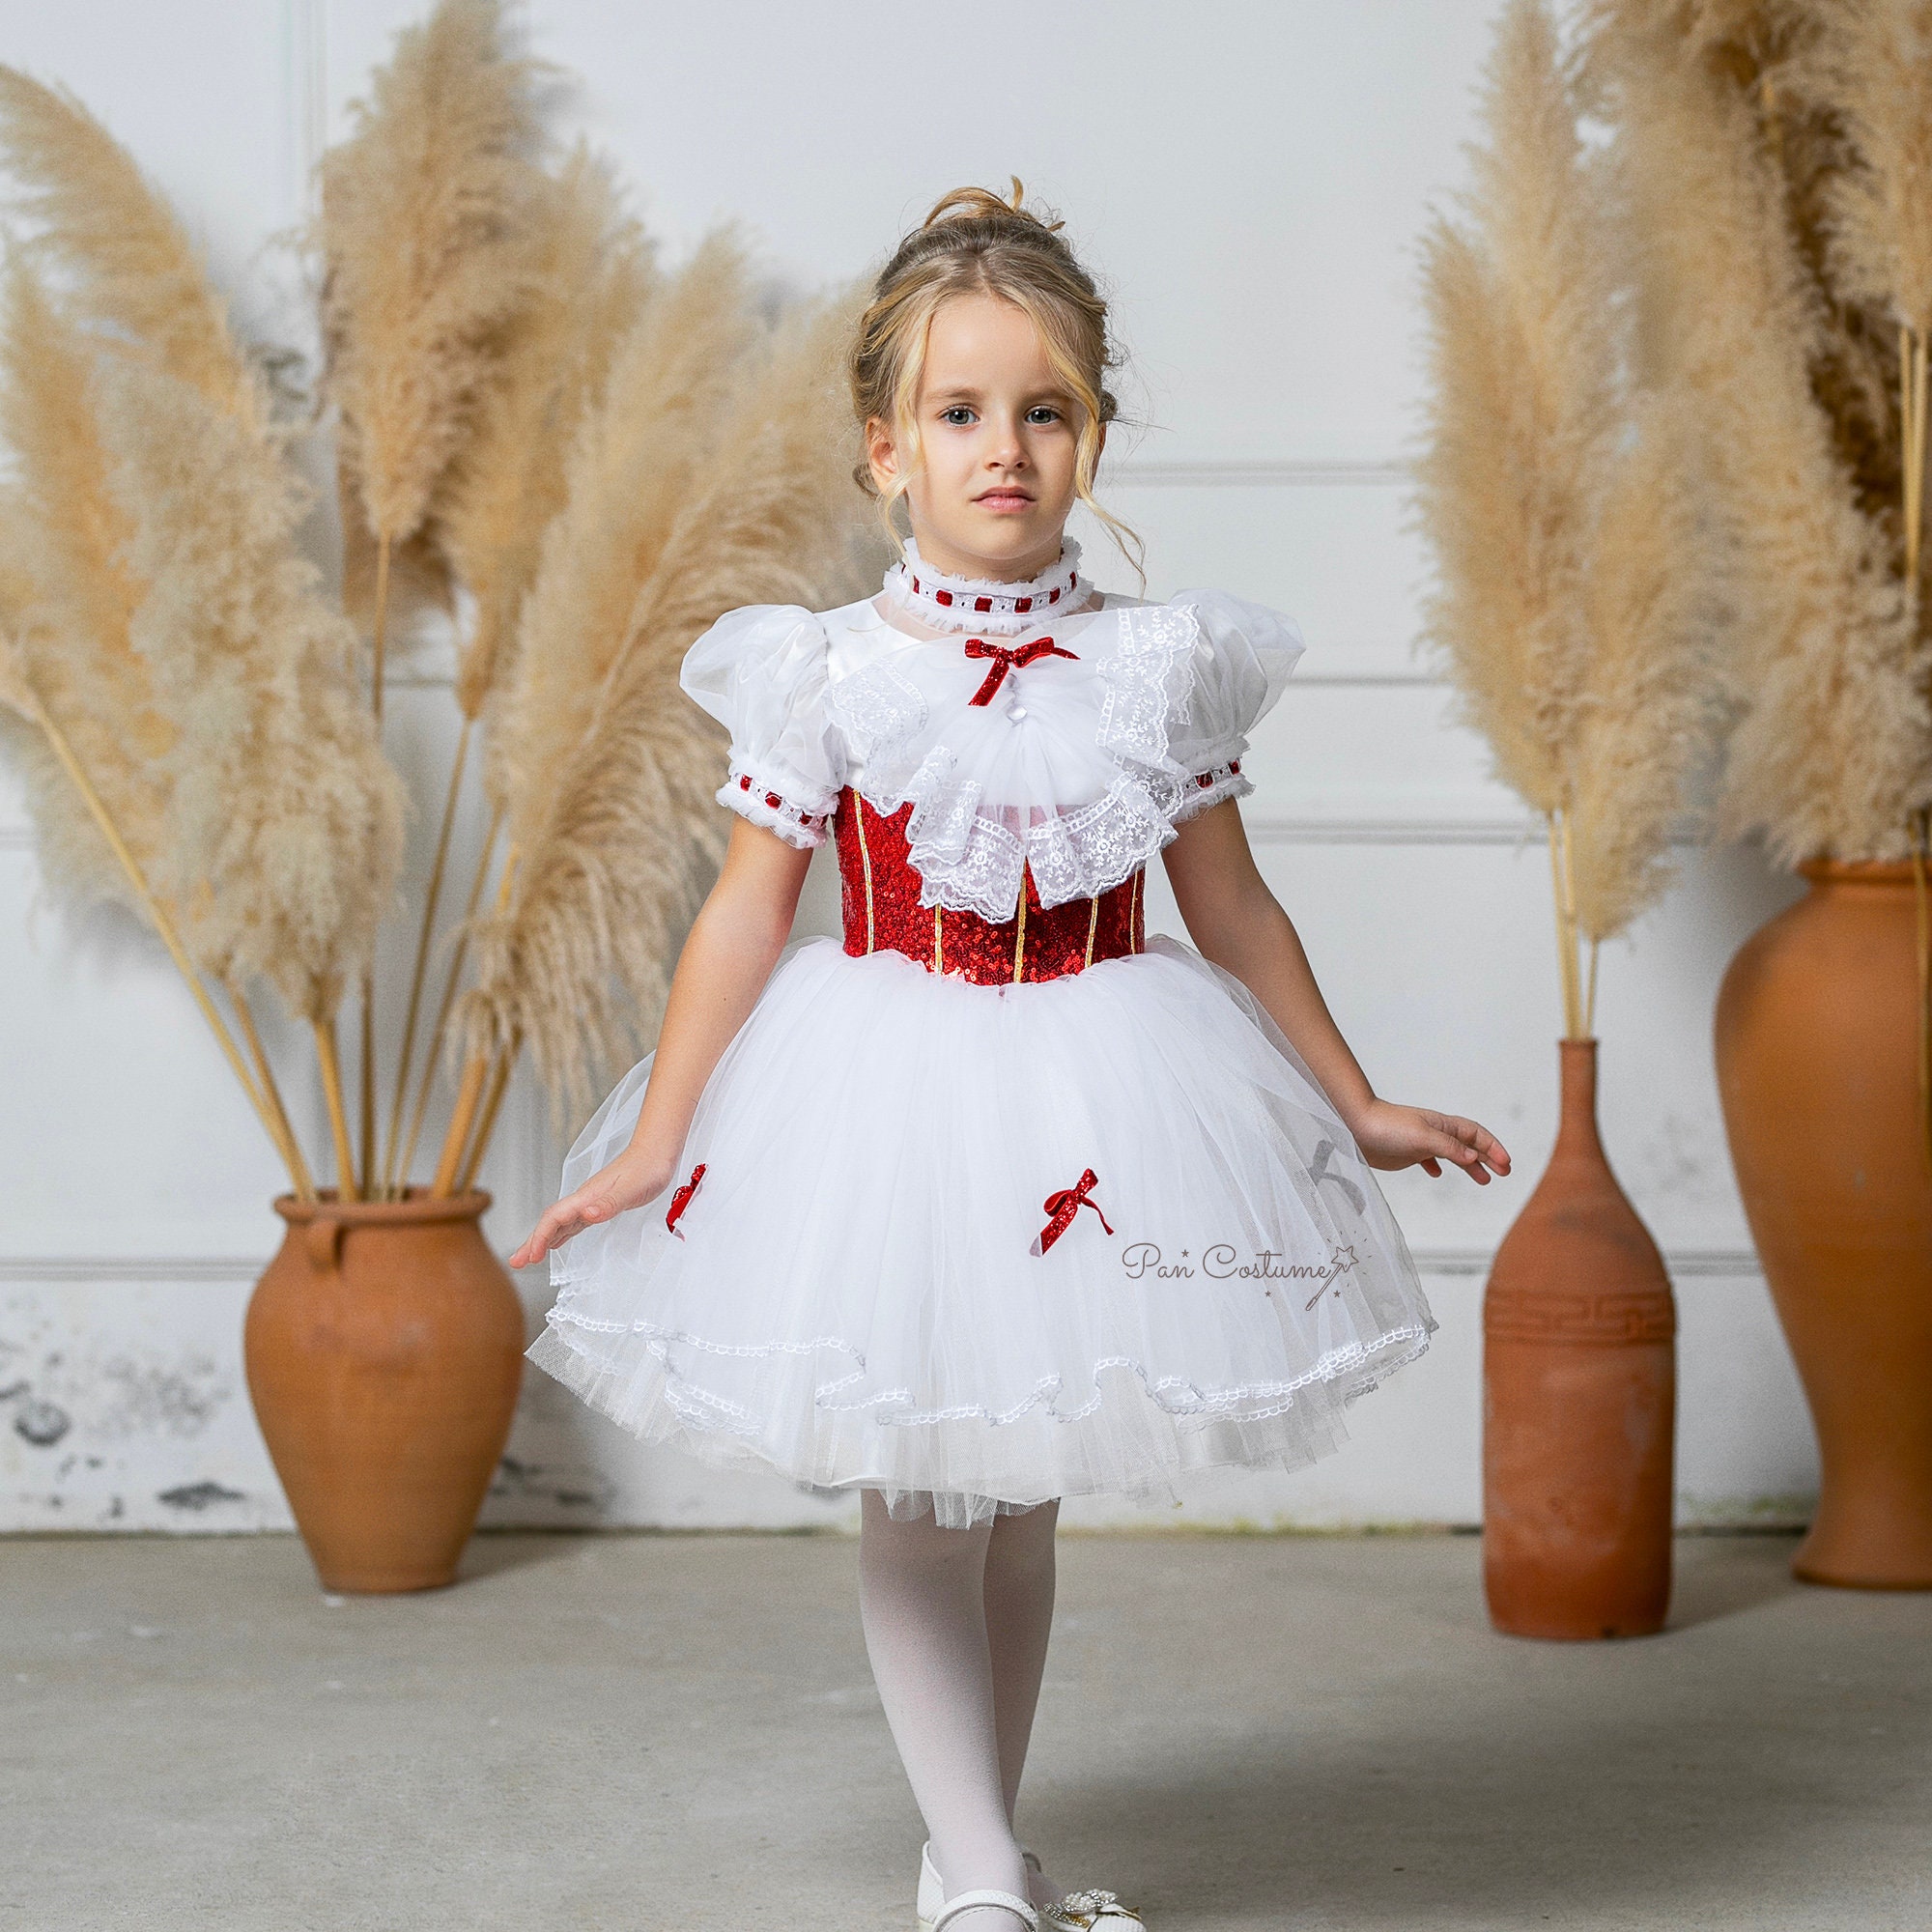 Mary Poppins Costume, Mary Poppins Inspired Tutu Dress for Toddler 